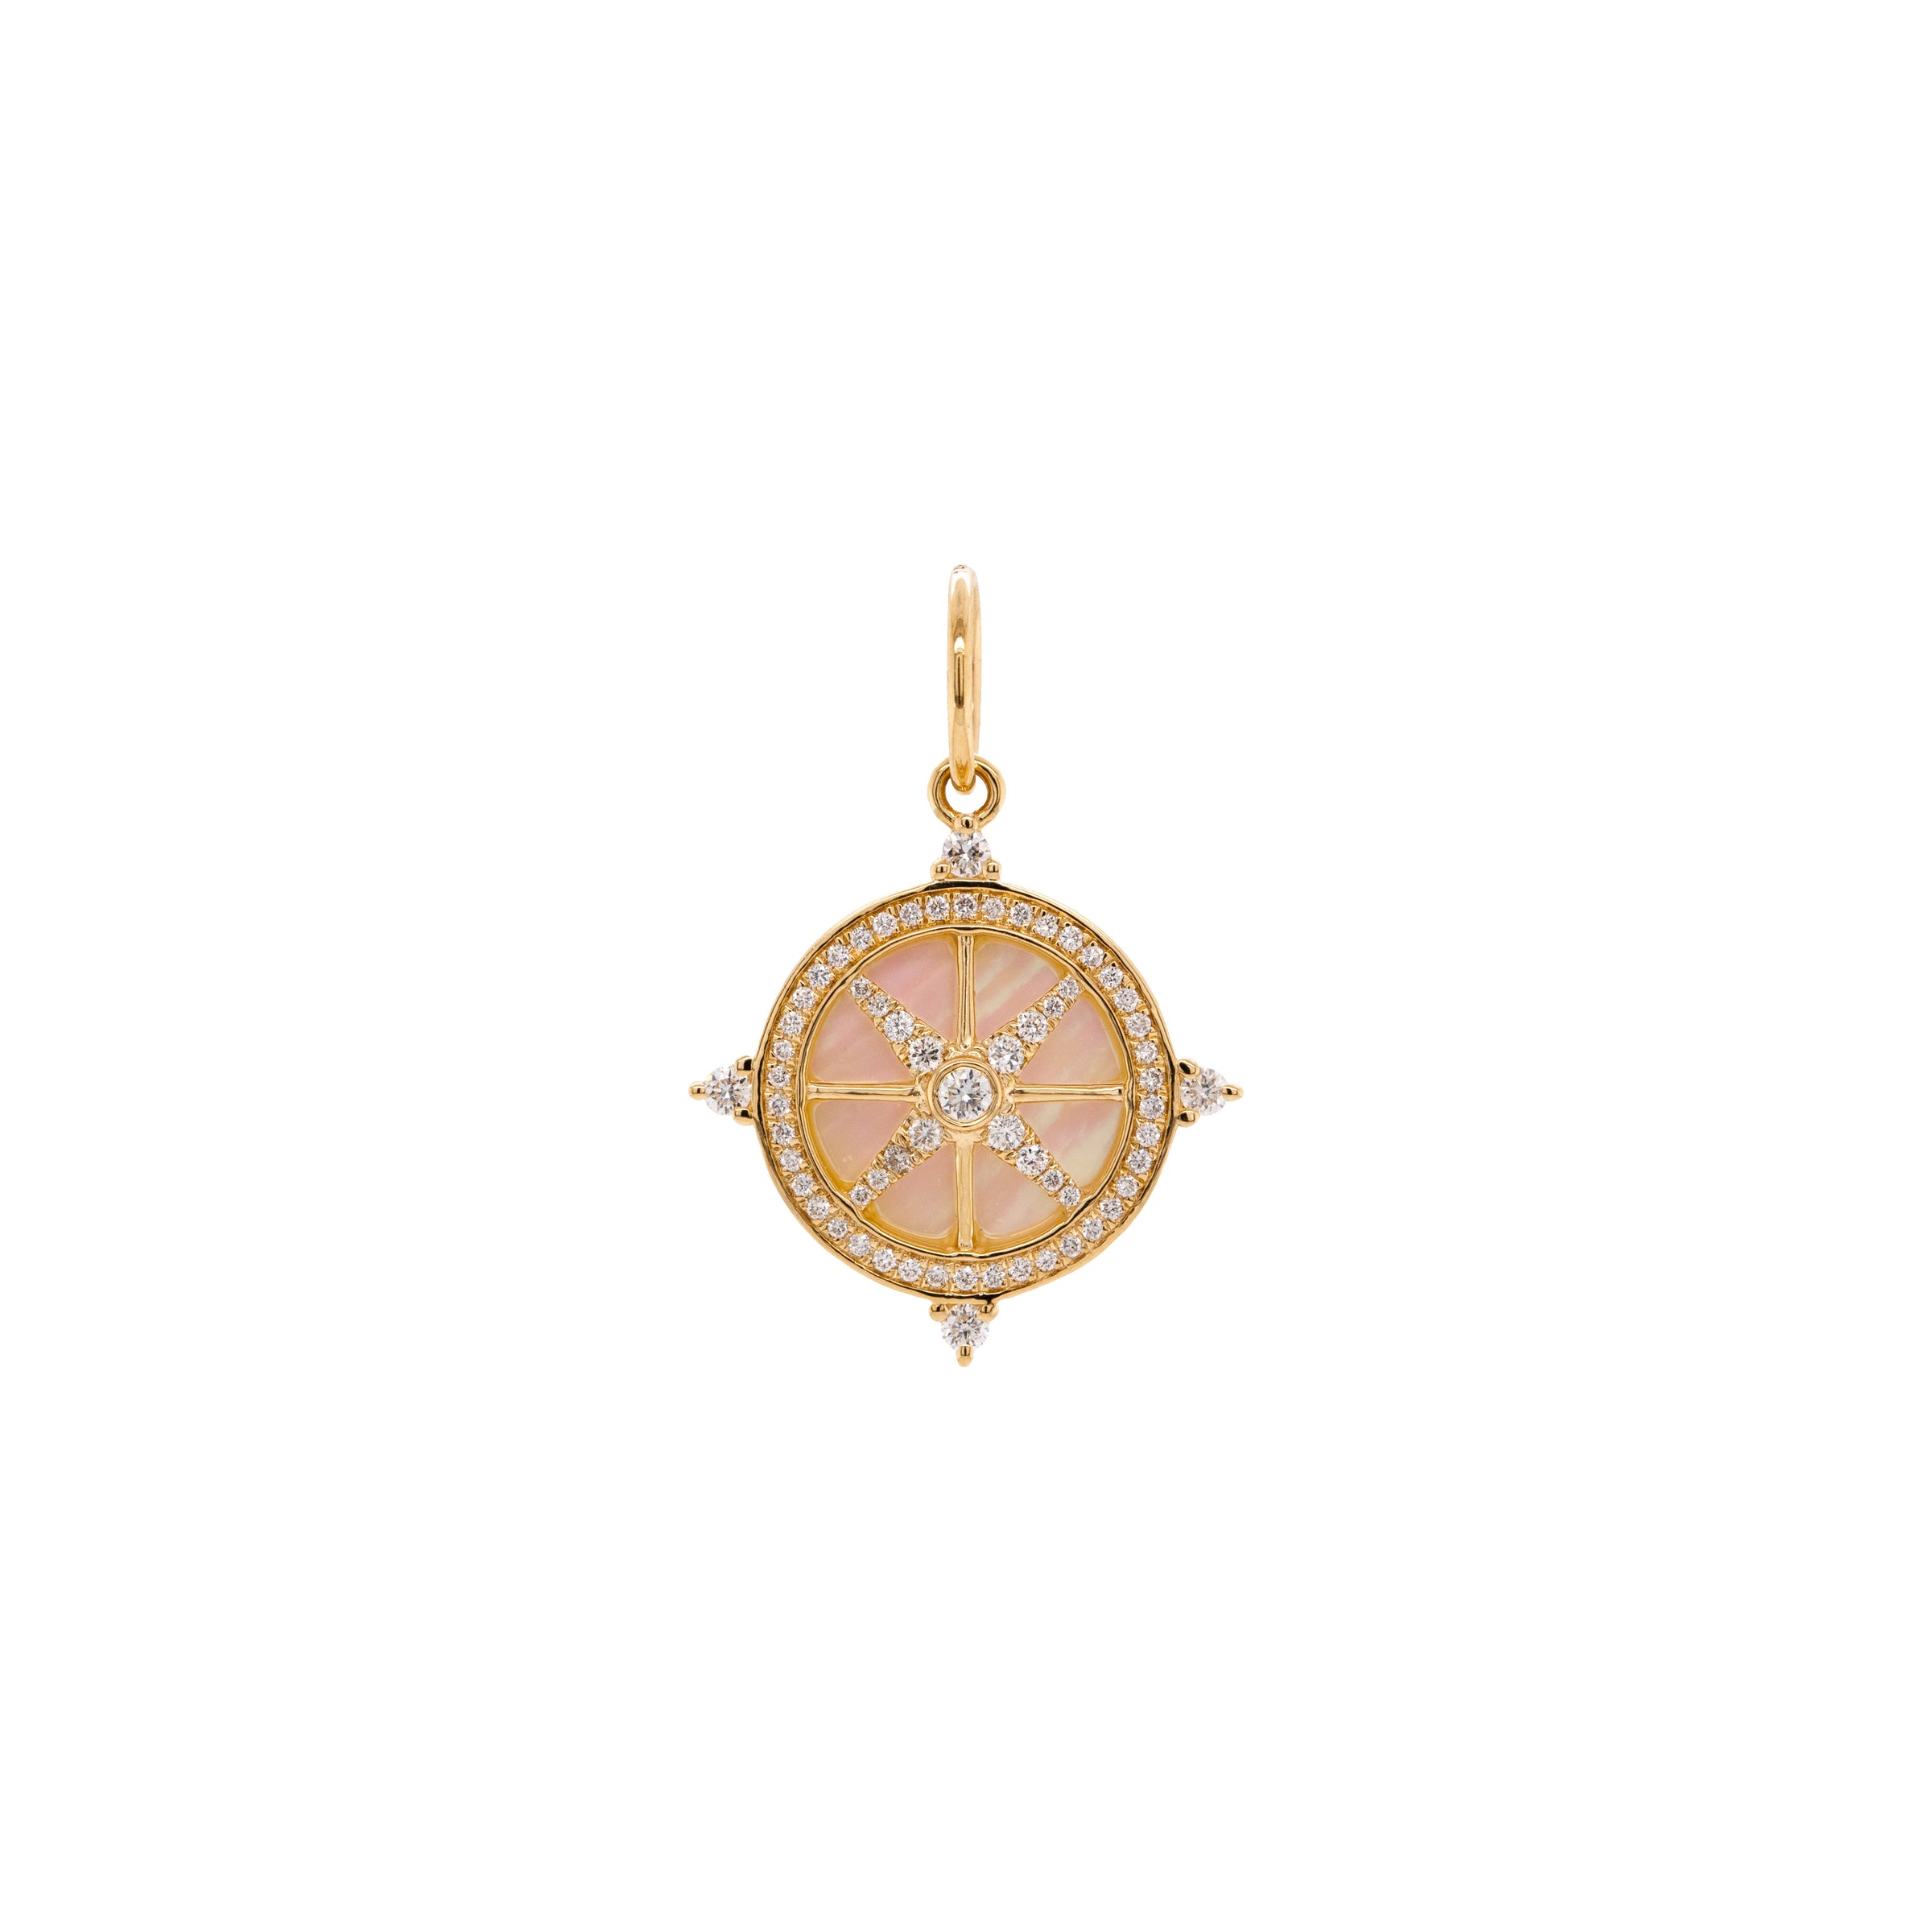 MOTHER-OF-PEARL COMPASS PENDANT